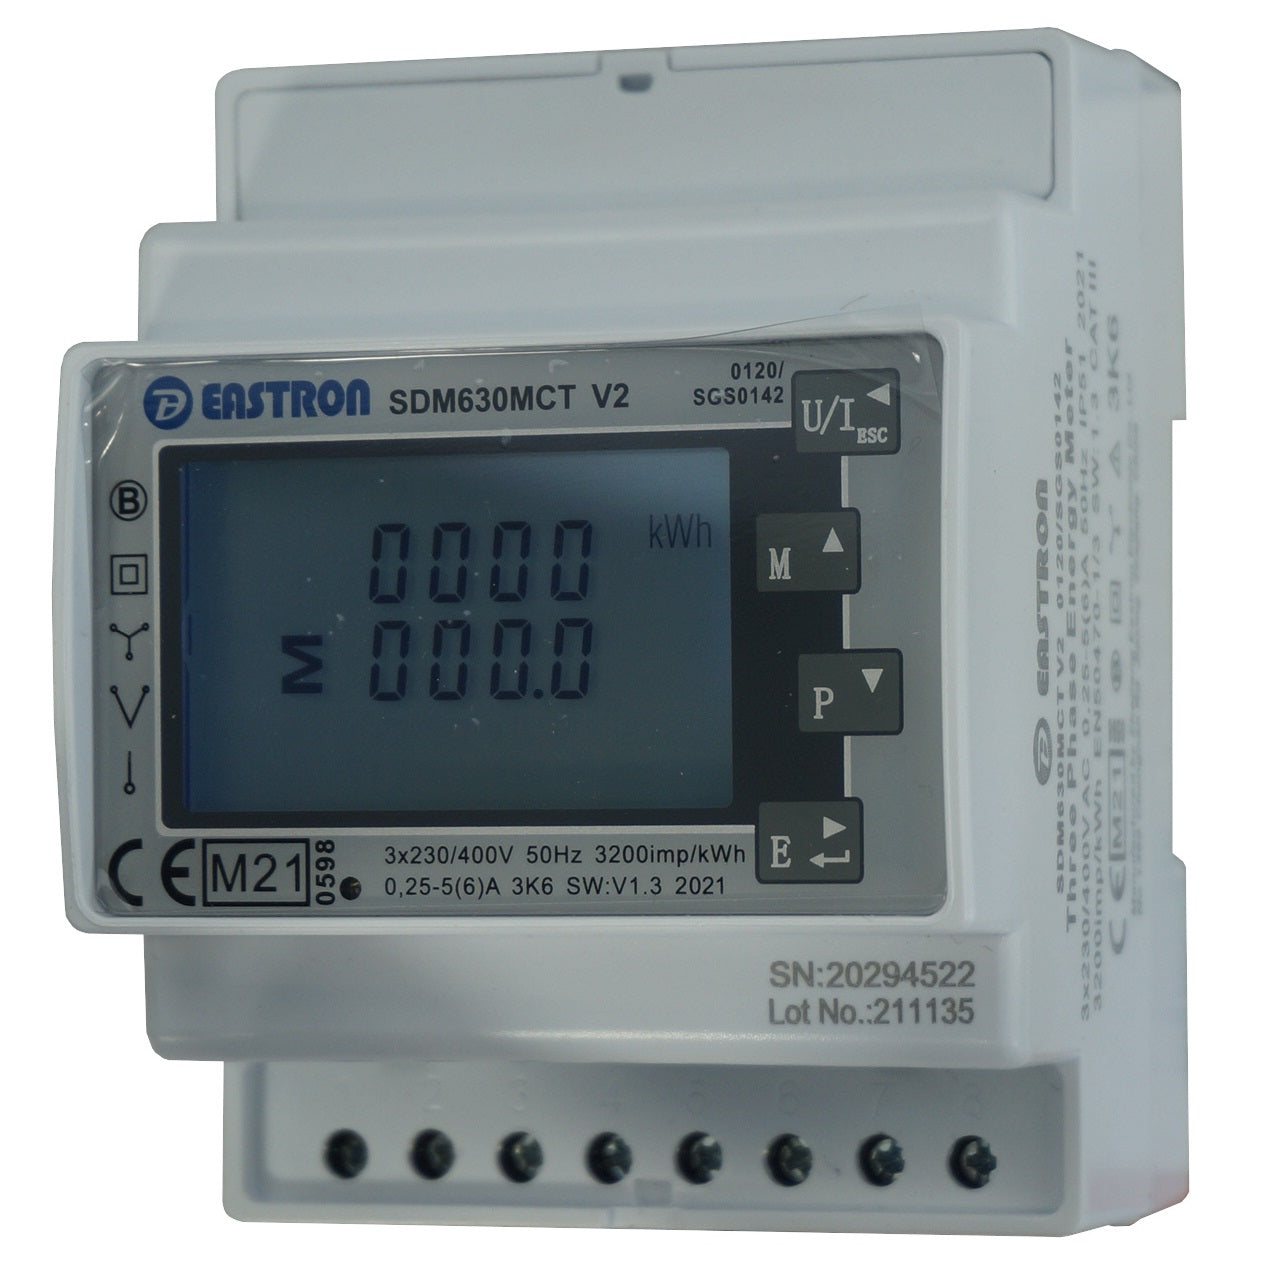 SDM630MCT-MODBUS-MID-CL1 V2, DIN Rail Mount kWh Meter, 3 Phase, 240VAC aux, Class 1, 1/5 Amp CT Connect, w/ 2 x pulse outputs and RS485 Modbus RTU Comms